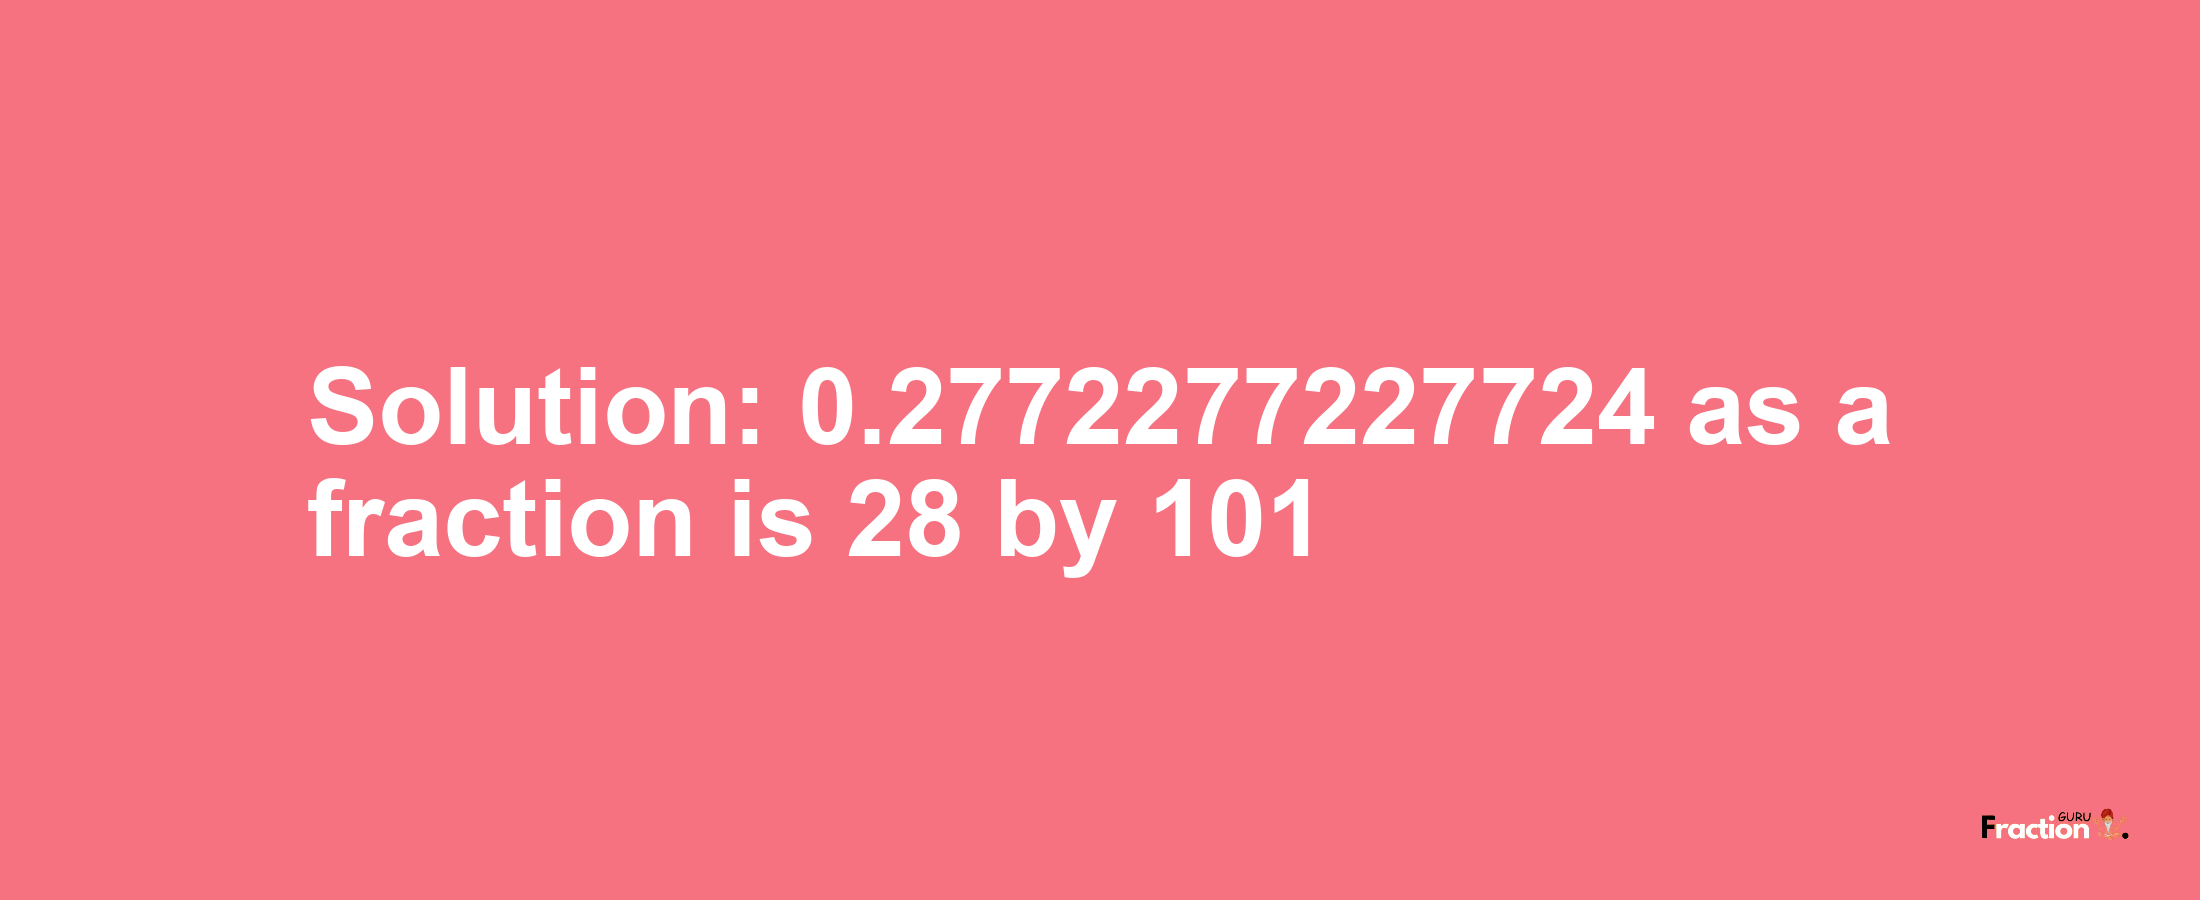 Solution:0.2772277227724 as a fraction is 28/101